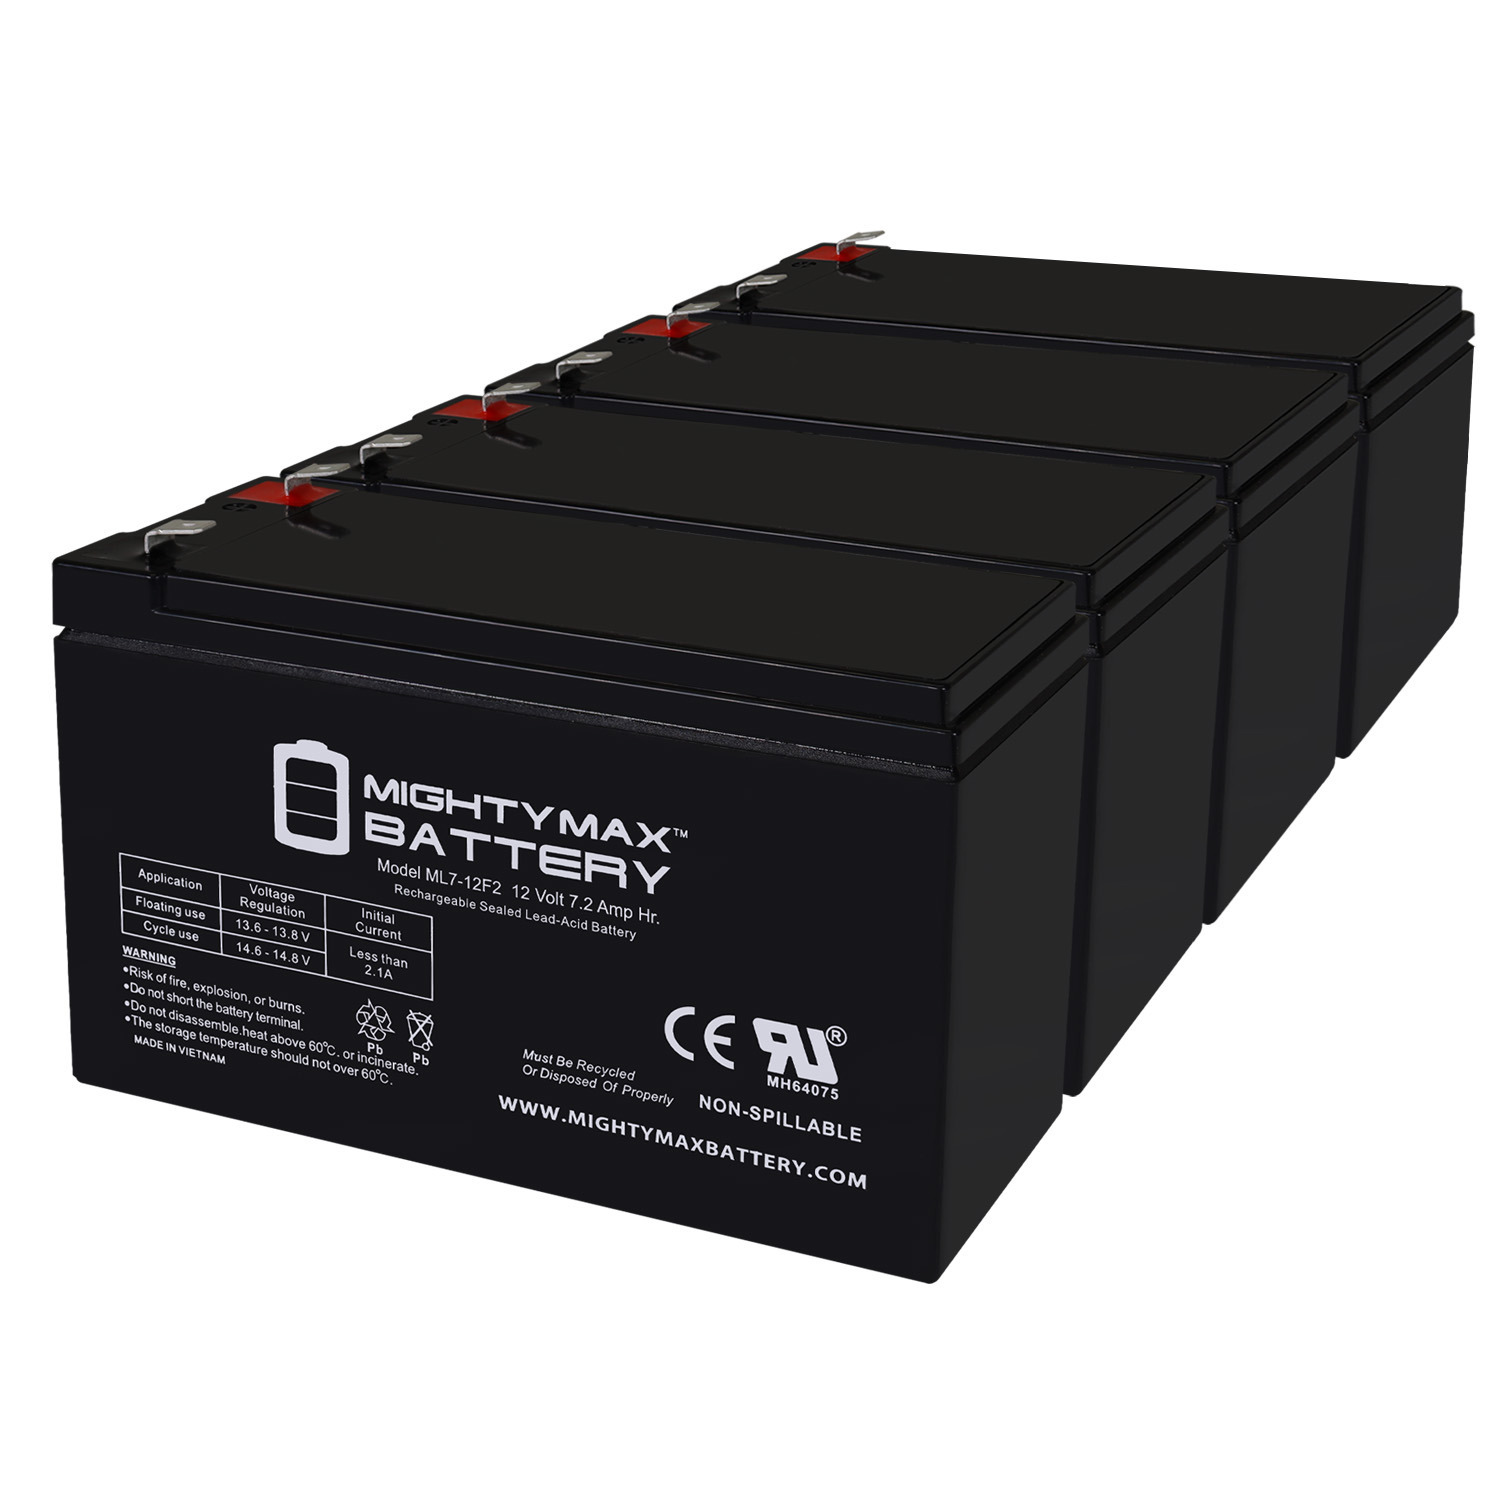 12V 7Ah F2 Replacement Battery for City Bug E2 Scooter - 4 Pack